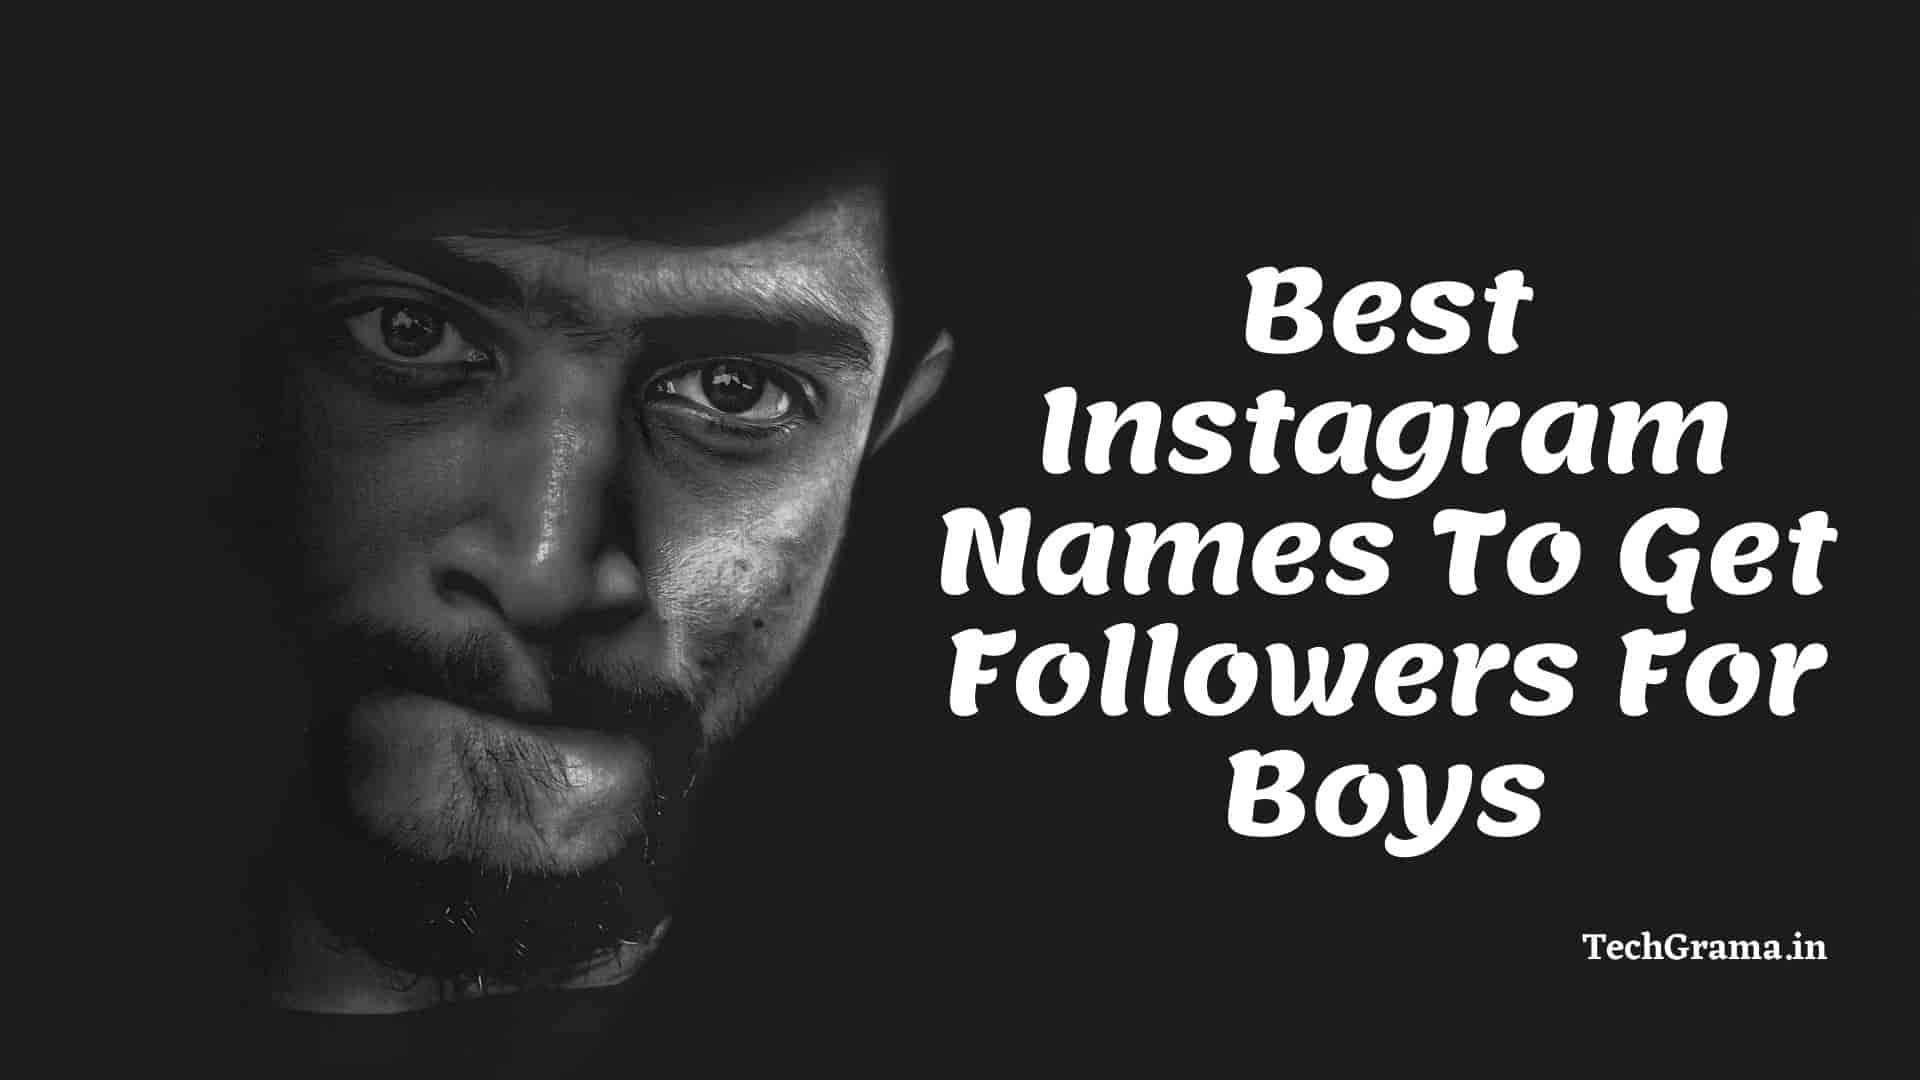 Attitude Names For Instagram For Boy, Bad Boy Names For Instagram, Attitude Names For Boy Indian, Attitude Names For Boy Instagram, Attitude Names For Instagram For Boy in Hindi, Best Instagram Names To Get Followers For Boy